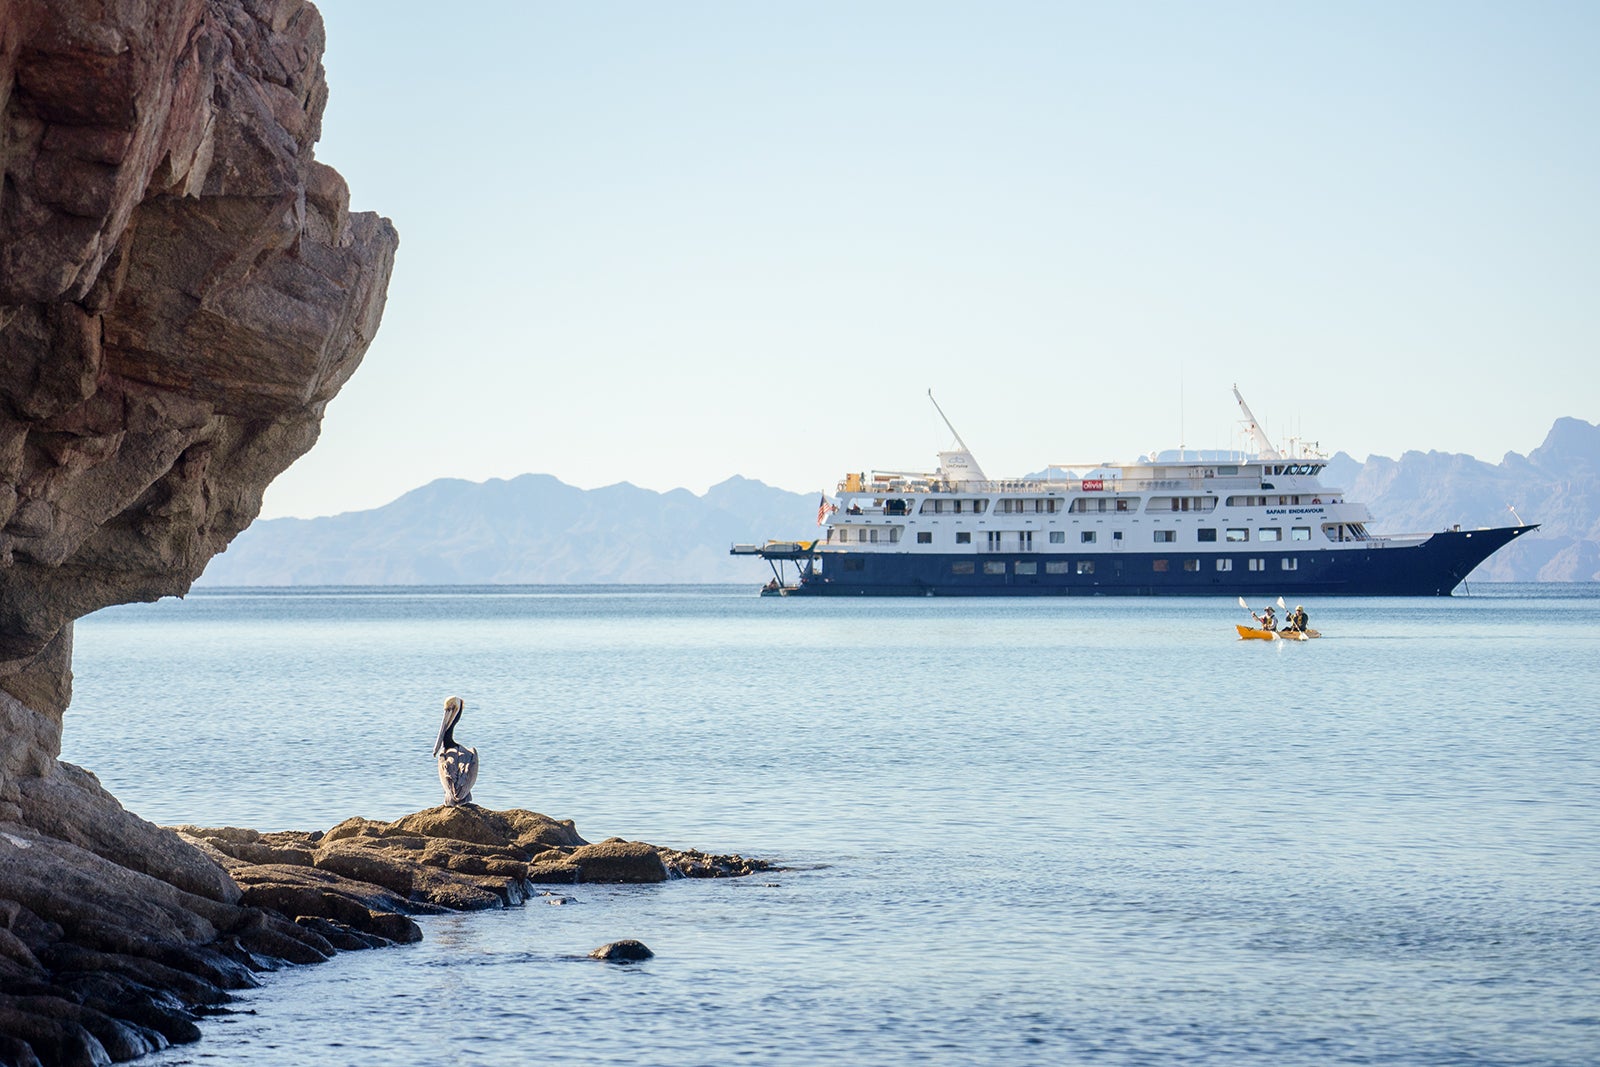 A cruise ship sailing into the frame next to a rock formation